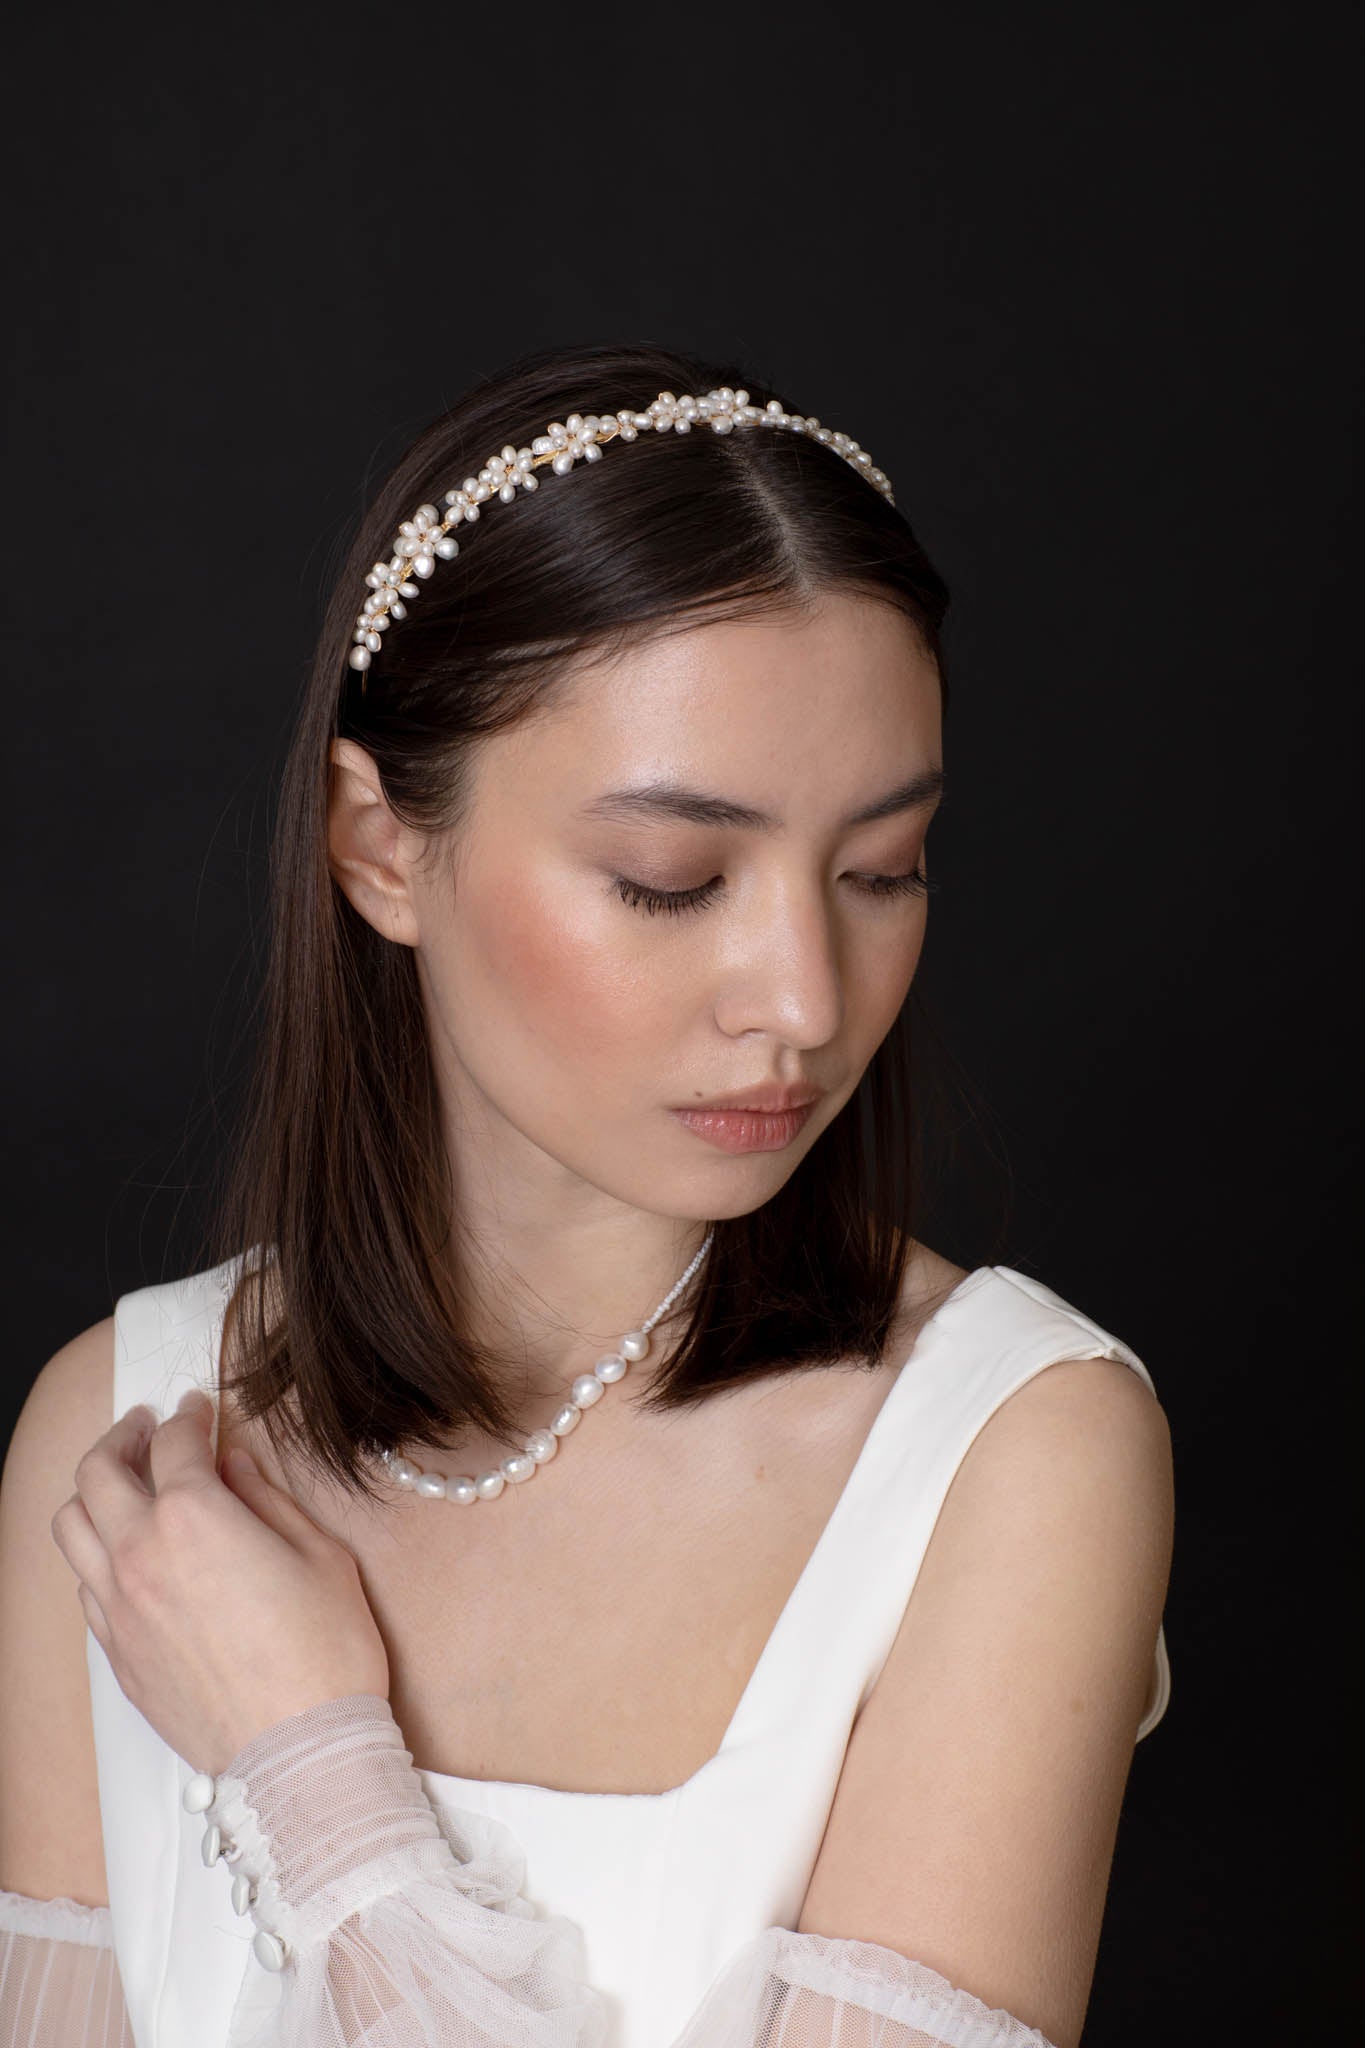 Sophisticated and dreamy pearl headband will compliment any bridal look. Look like a goddess walking down the aisle with light shimmering off each individual pearl.